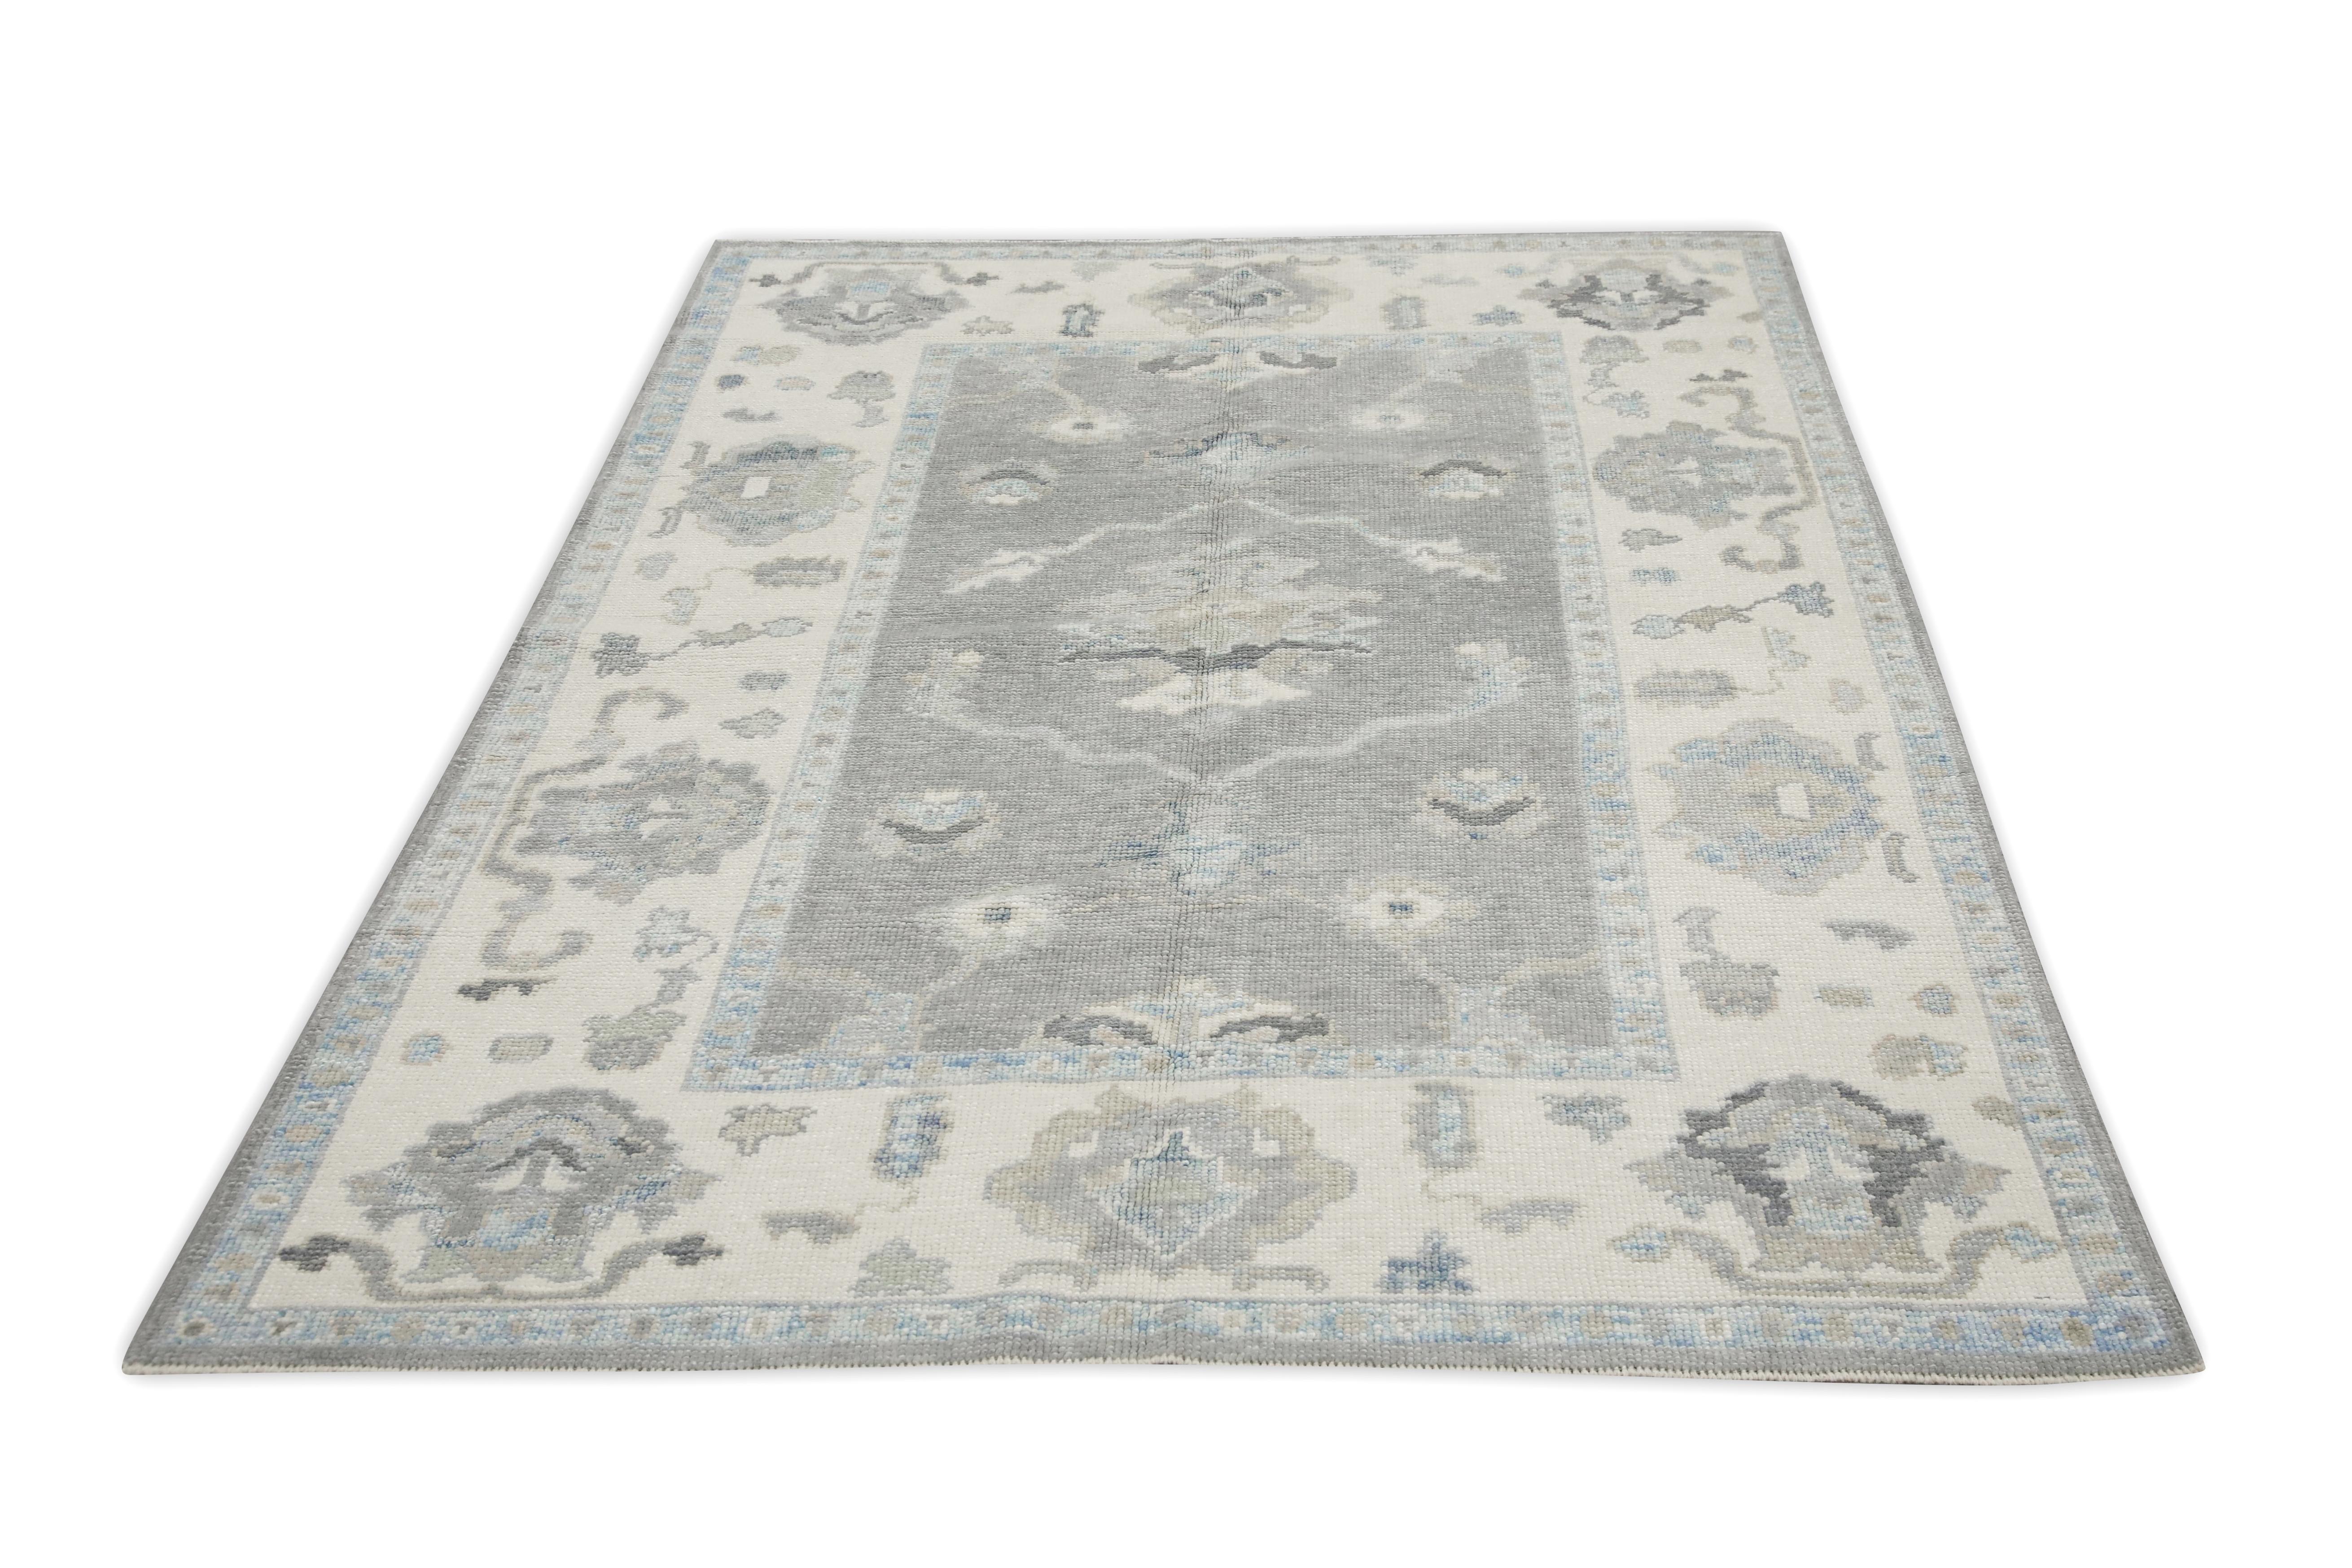 Contemporary Gray Floral Design Handwoven Wool Turkish Oushak Rug 4'9